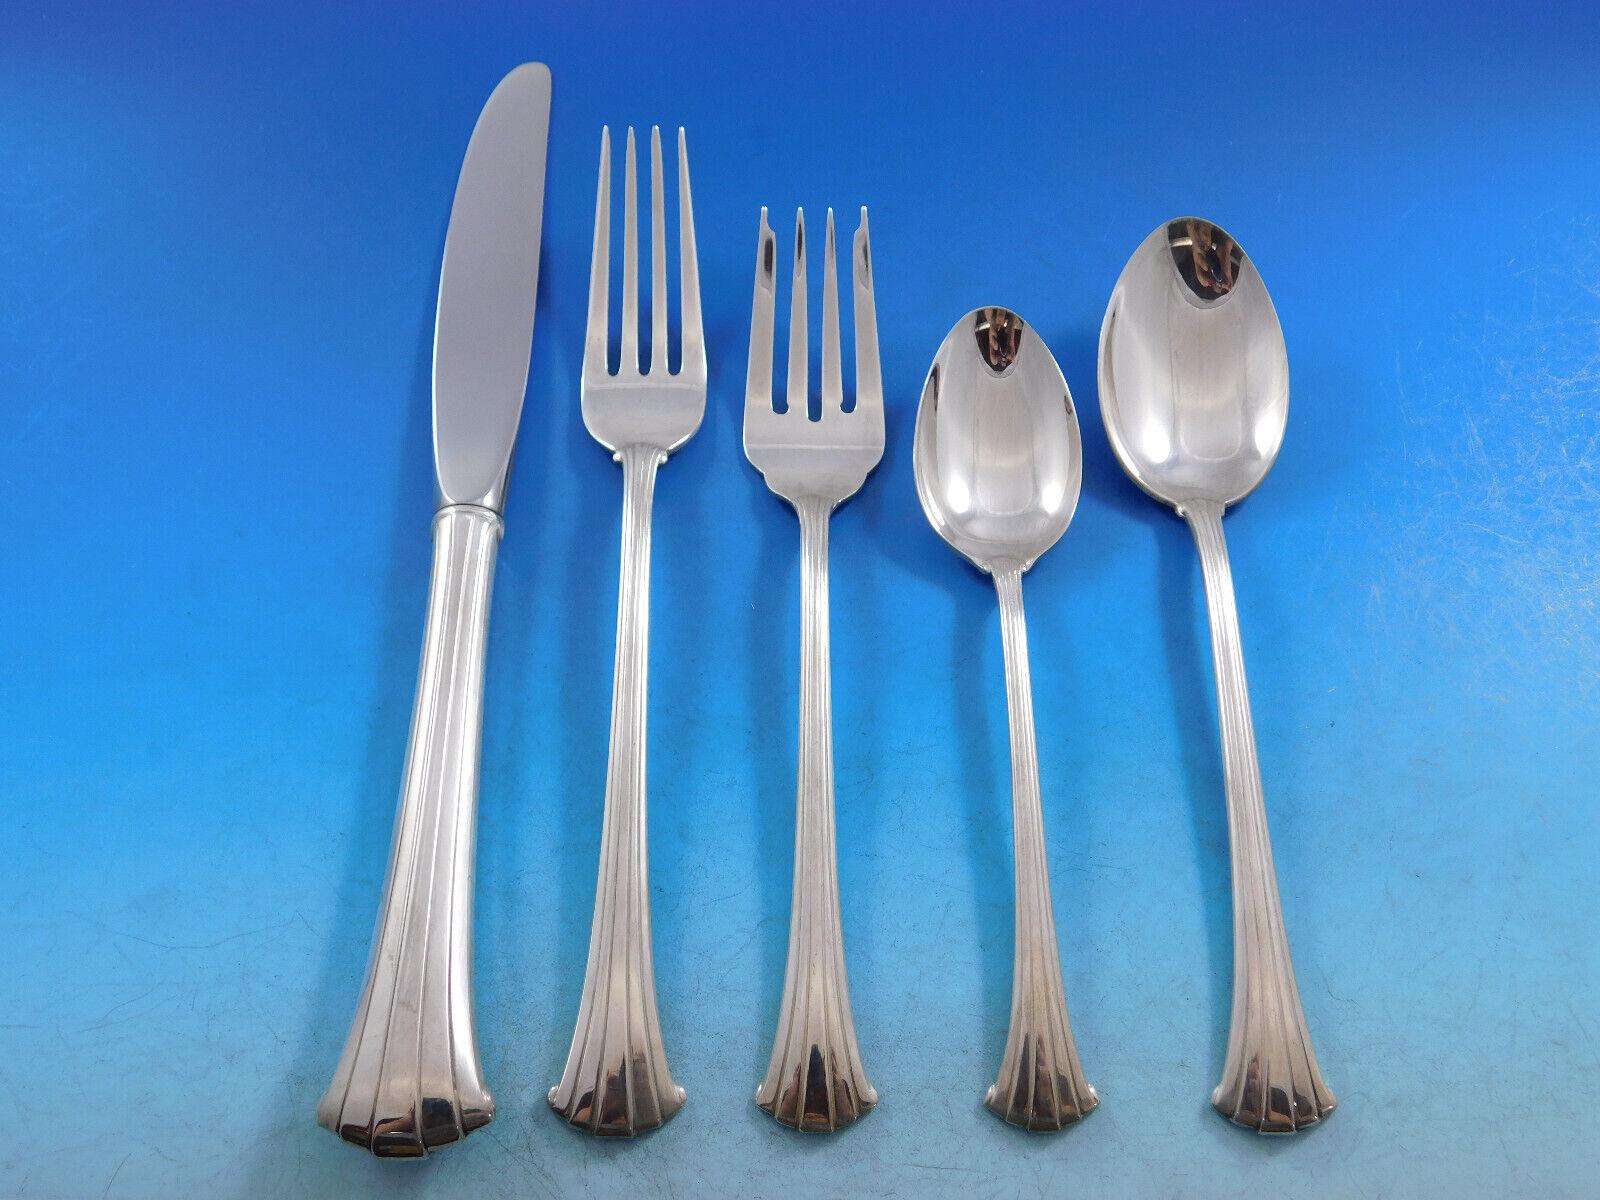 Gracefully curved lines distinguish Newport Scroll. The gently flared ends of each handle add a unique and interesting element to any table setting.
Newport Scroll by Gorham sterling silver Flatware set, 69 pieces. This set includes:

12 Place